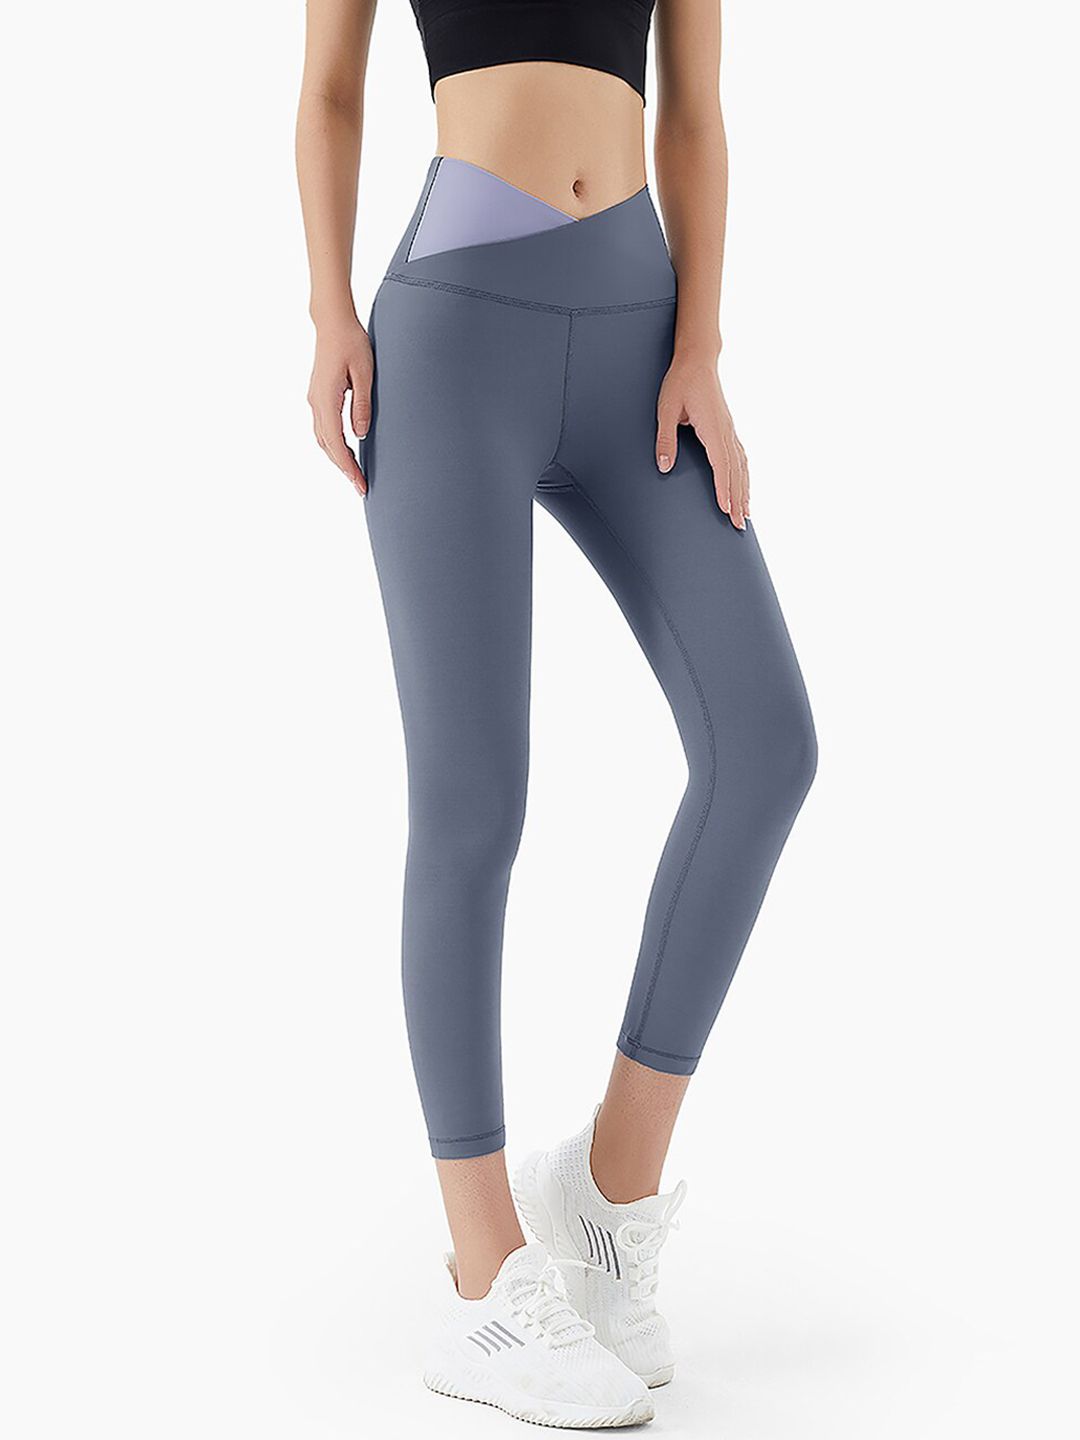 JC Collection Women Grey Solid Tights Price in India